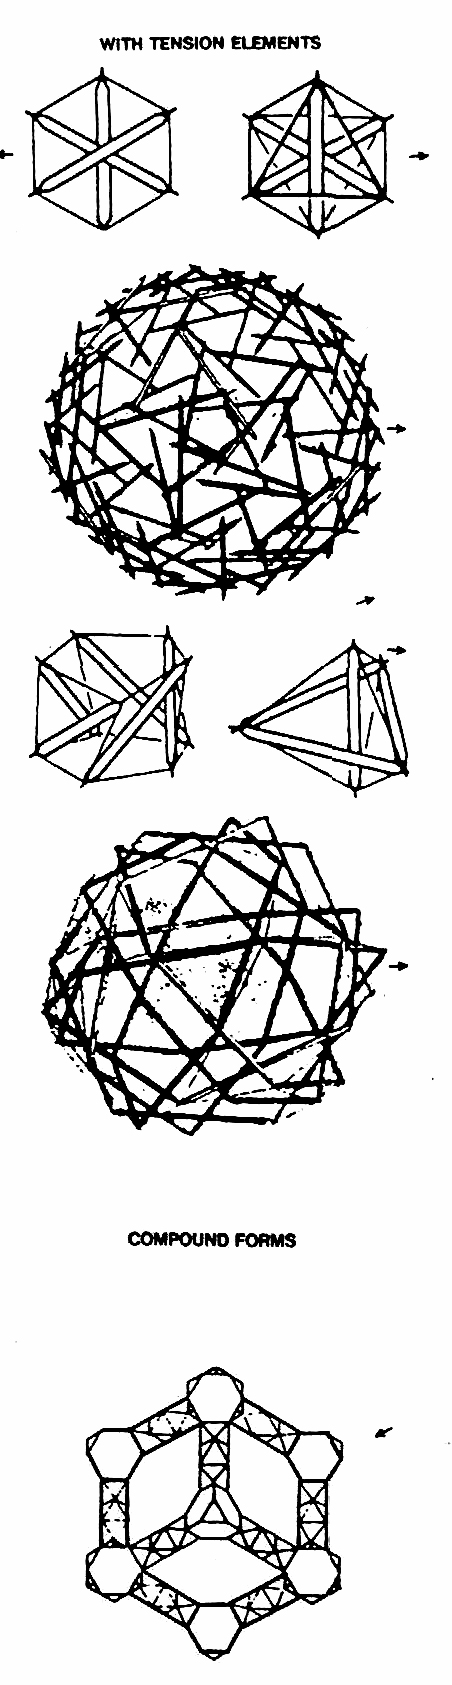 Summary of symmetrical 2- and 3-dimensional forms